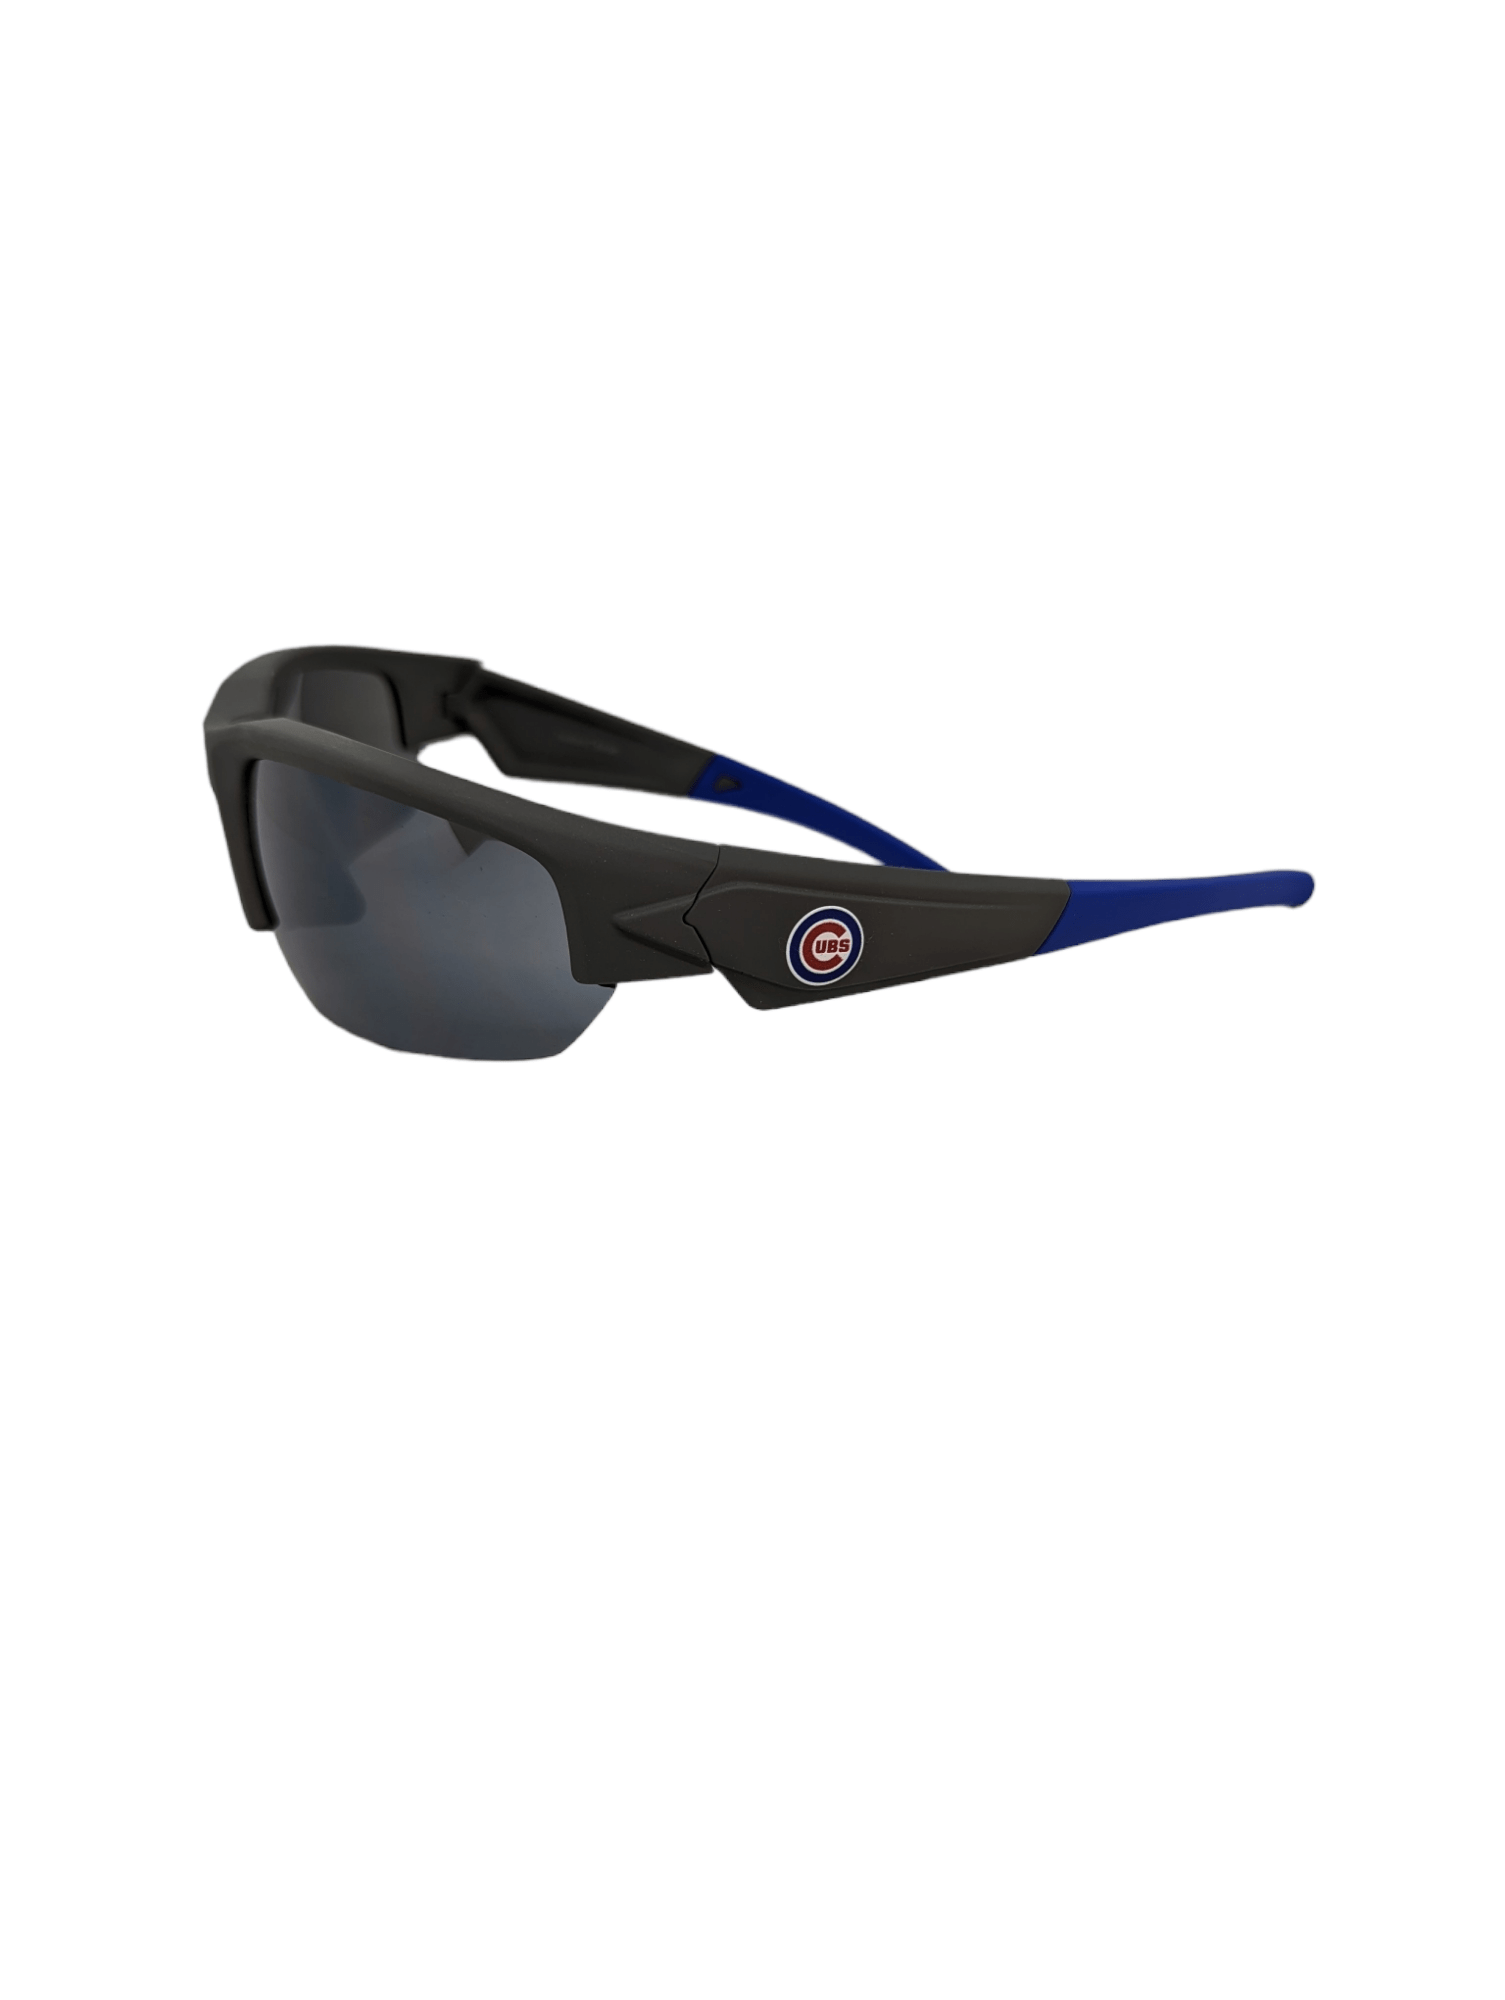 On The Mark Sunglasses Chicago Cubs Sunglasses